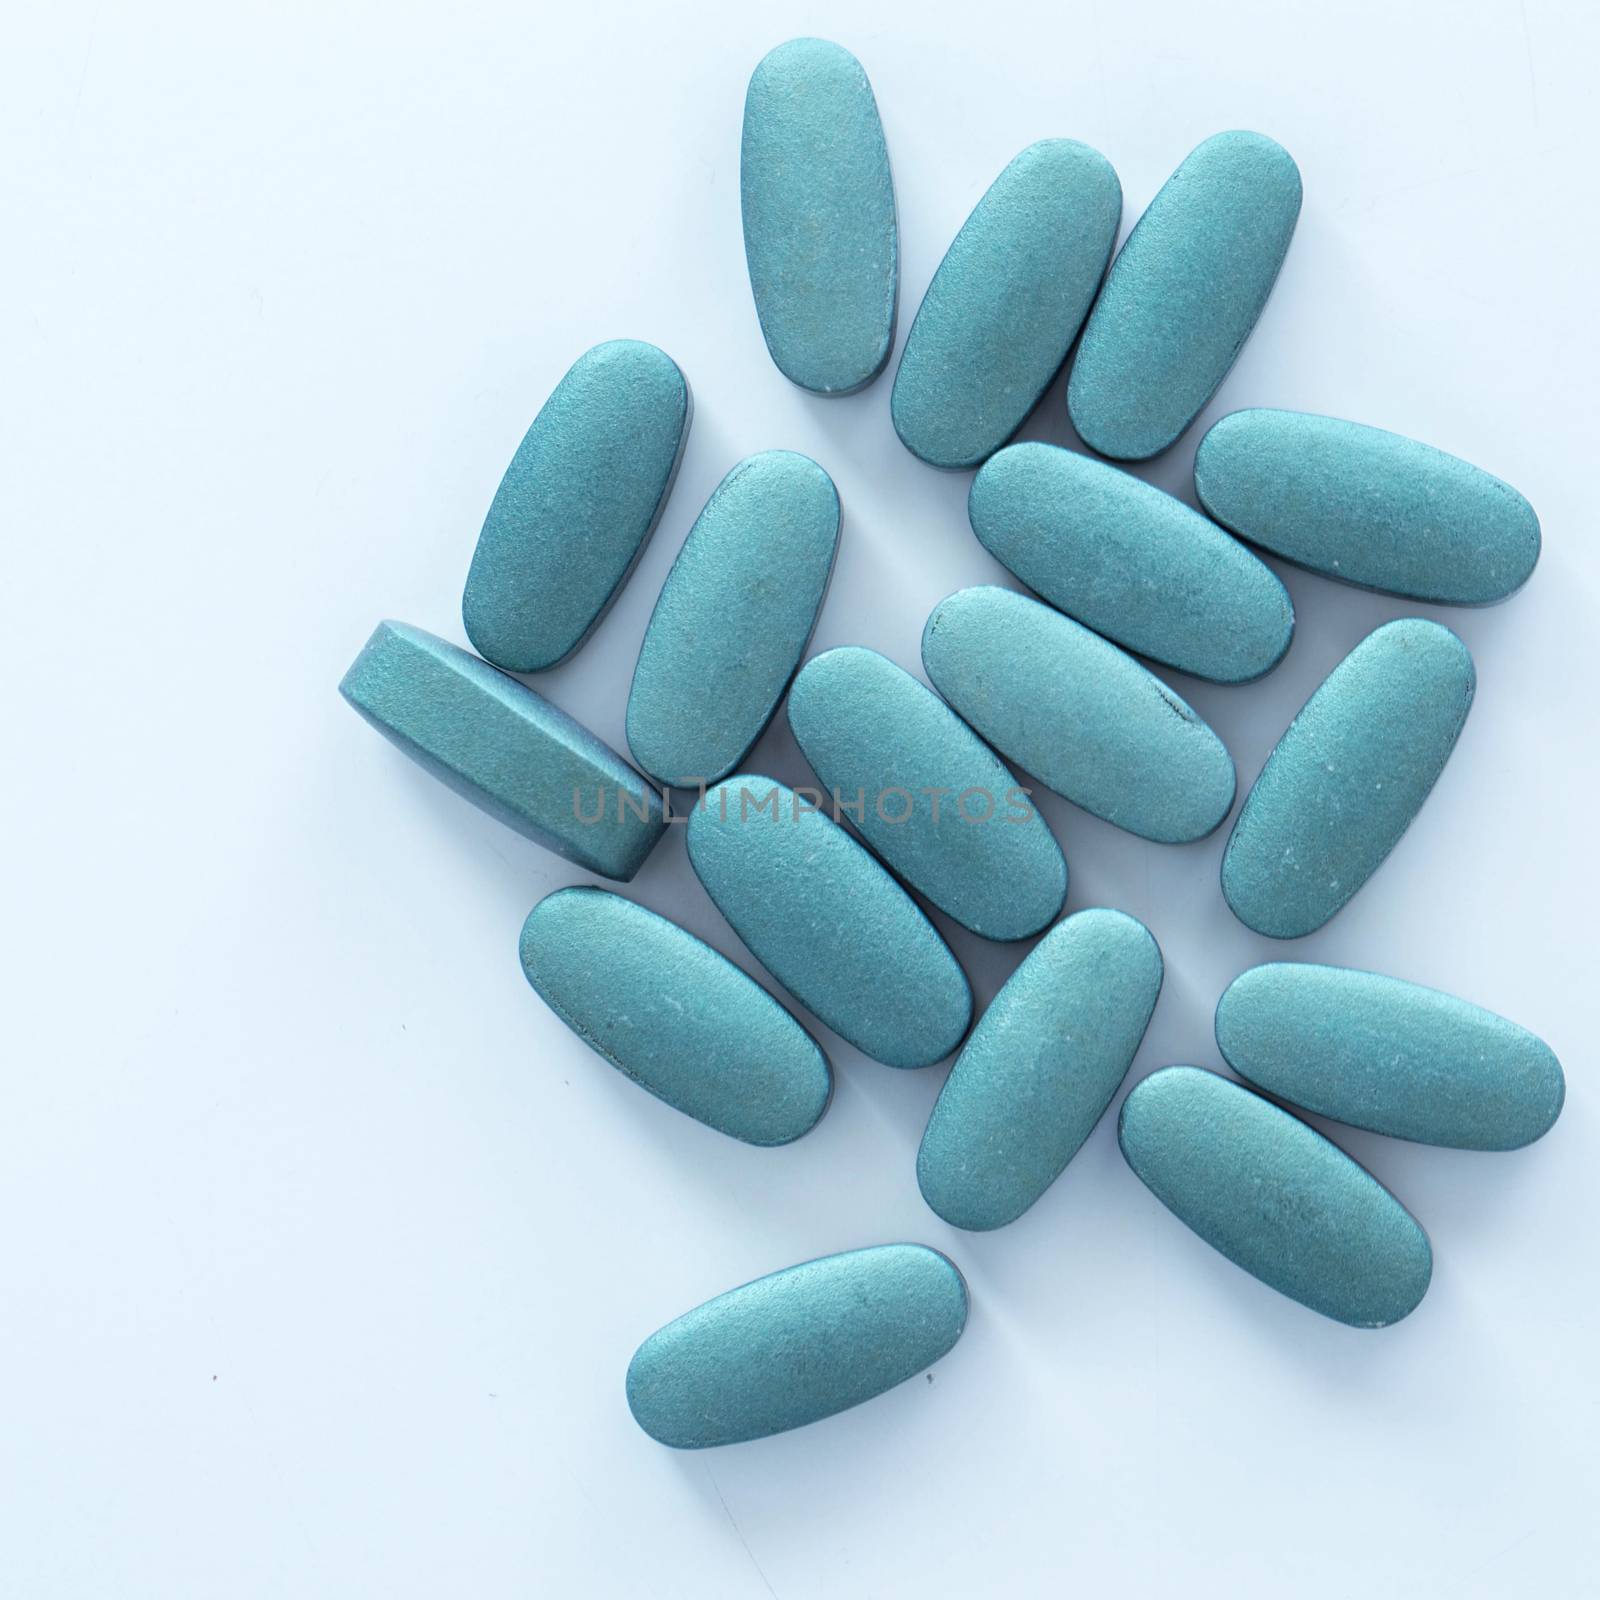 Closeup picture of blue pills over a white background